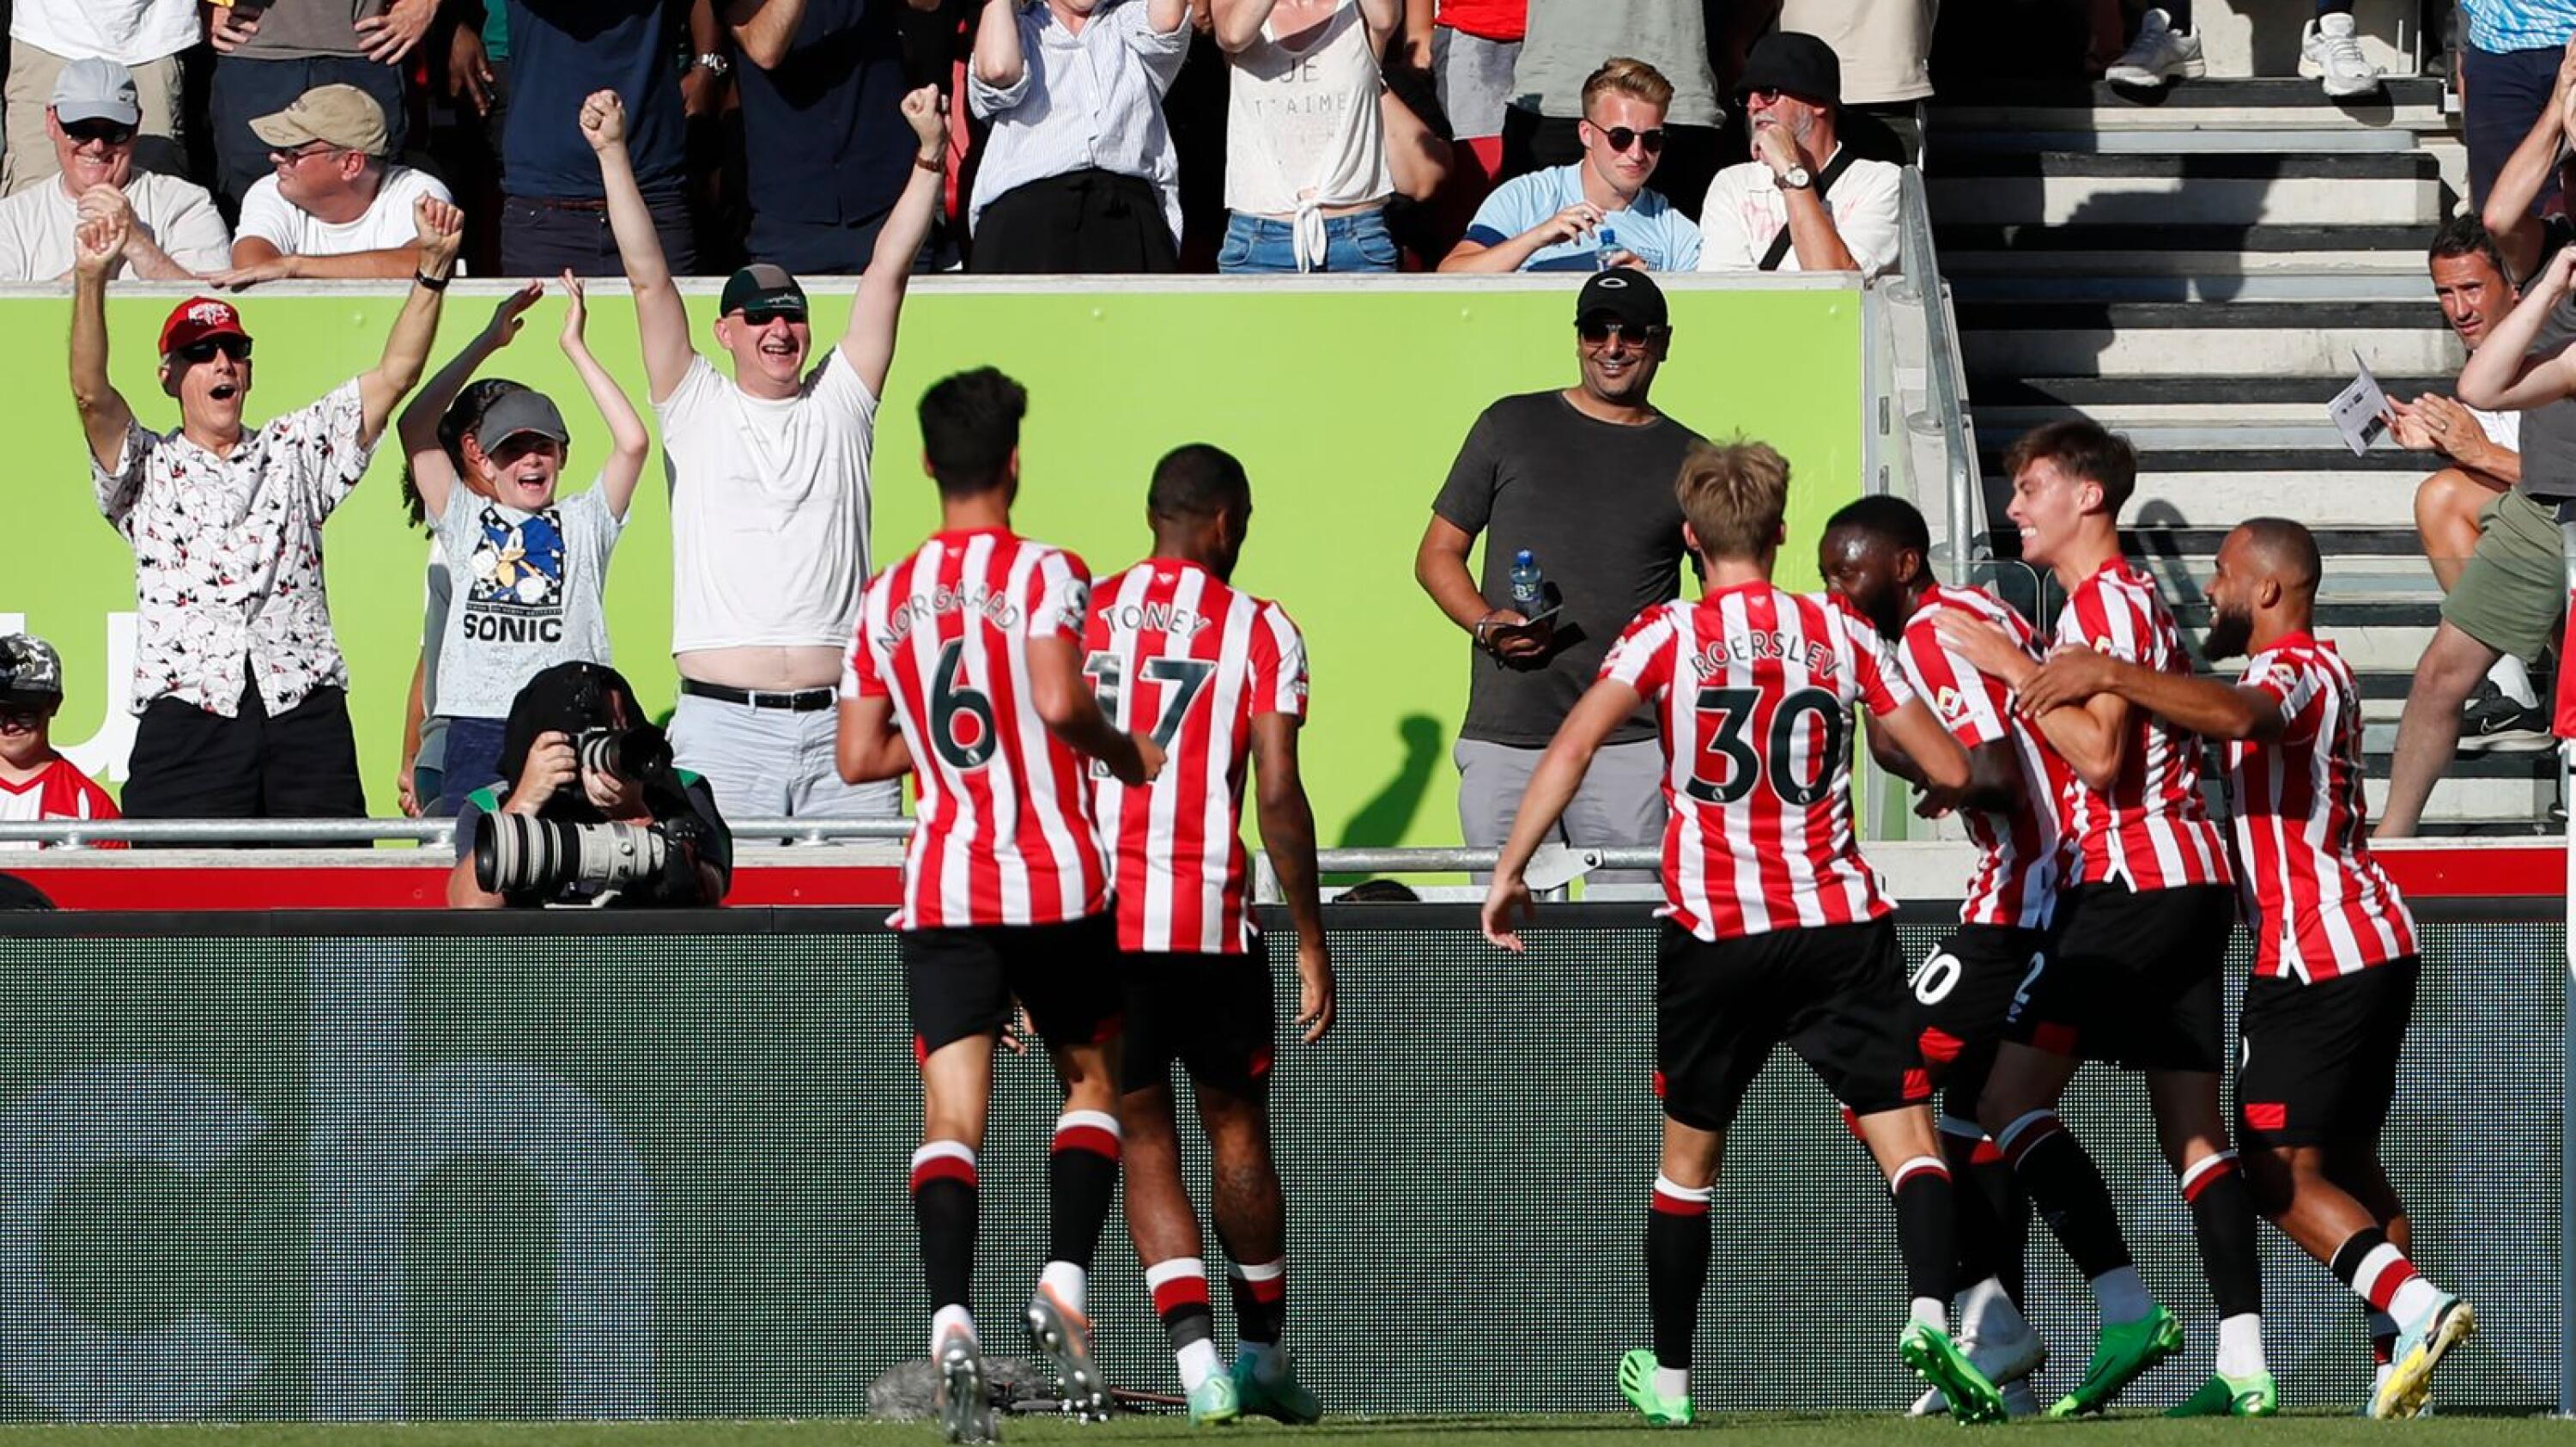 Brentford's English midfielder Josh Dasilva (3rd R) celebrates with teammates after scoring the opening goal during their English Premier League football match against Manchester United at Brentford Community Stadium in London on Saturday